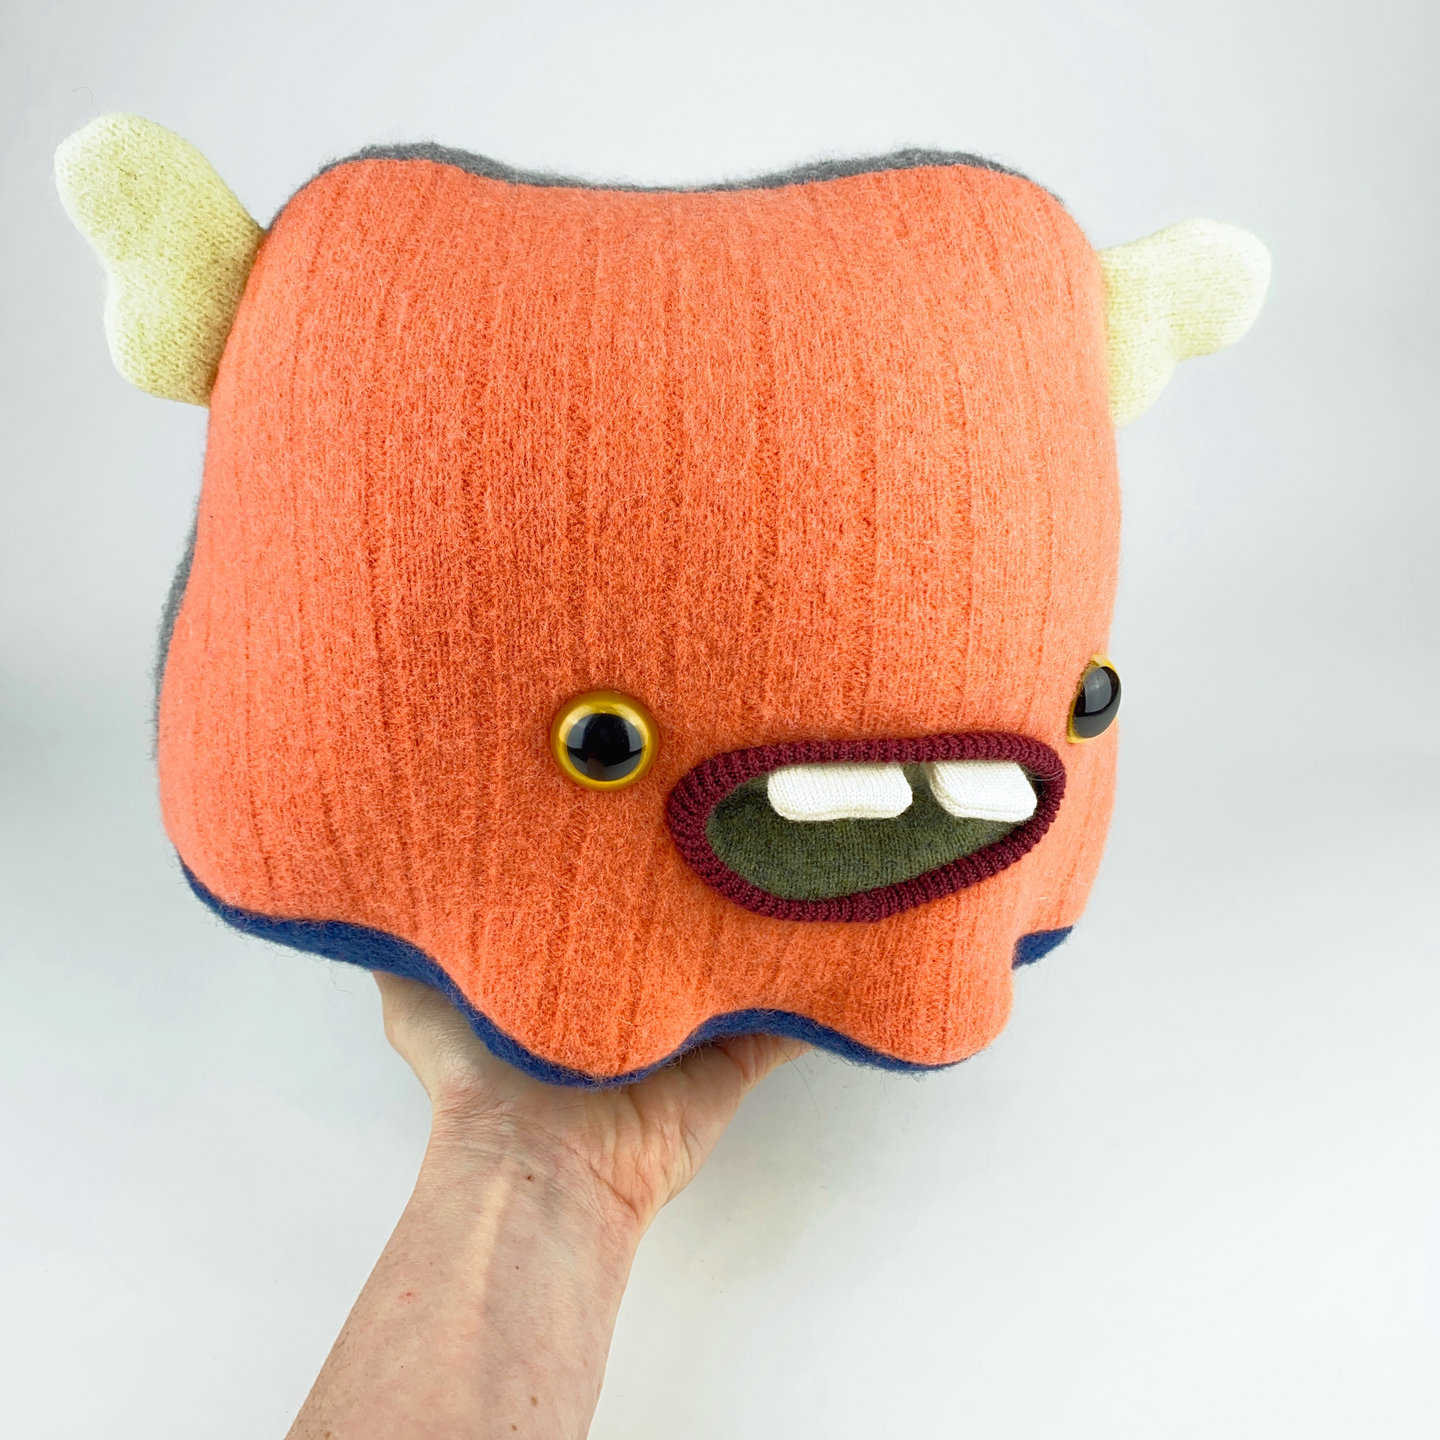 Oodles the plush friendly monster